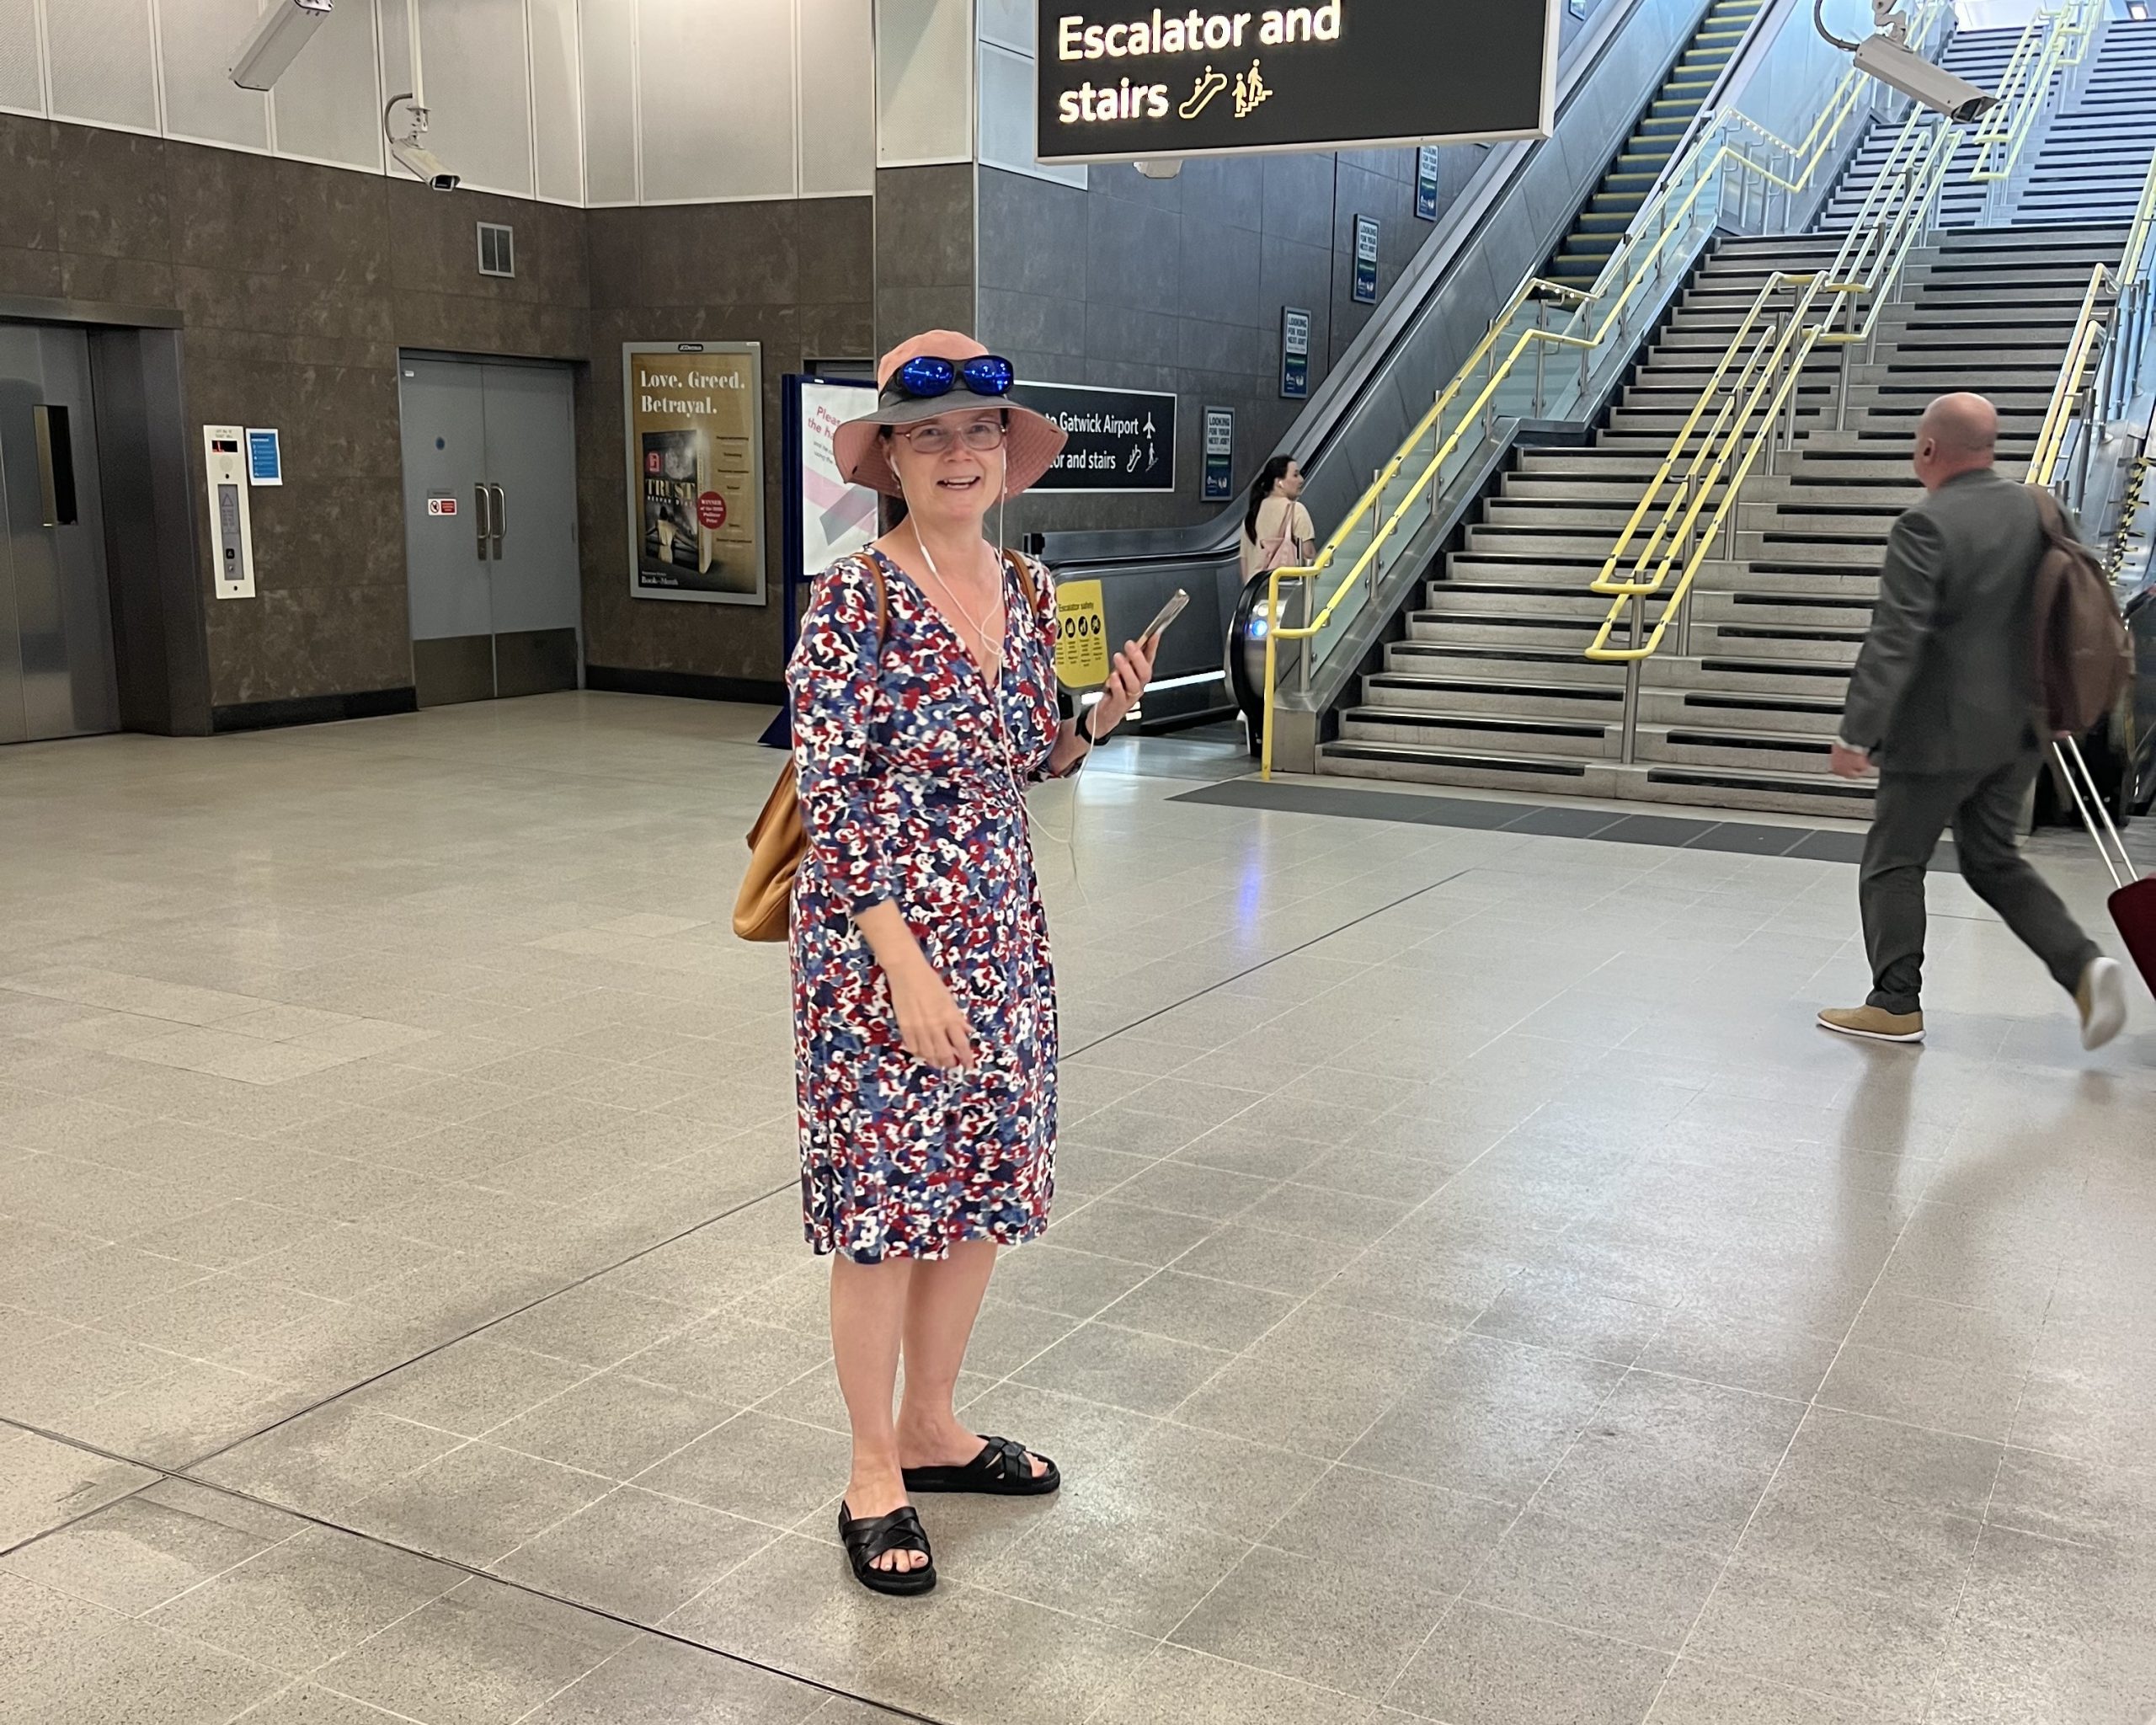 Vicky Blencowe, South West London SLC member, pictured at London Blackfriars train station. She is facing the camera, and holding her smartphone in her hand, whilst on the phone to an AIRA representative.